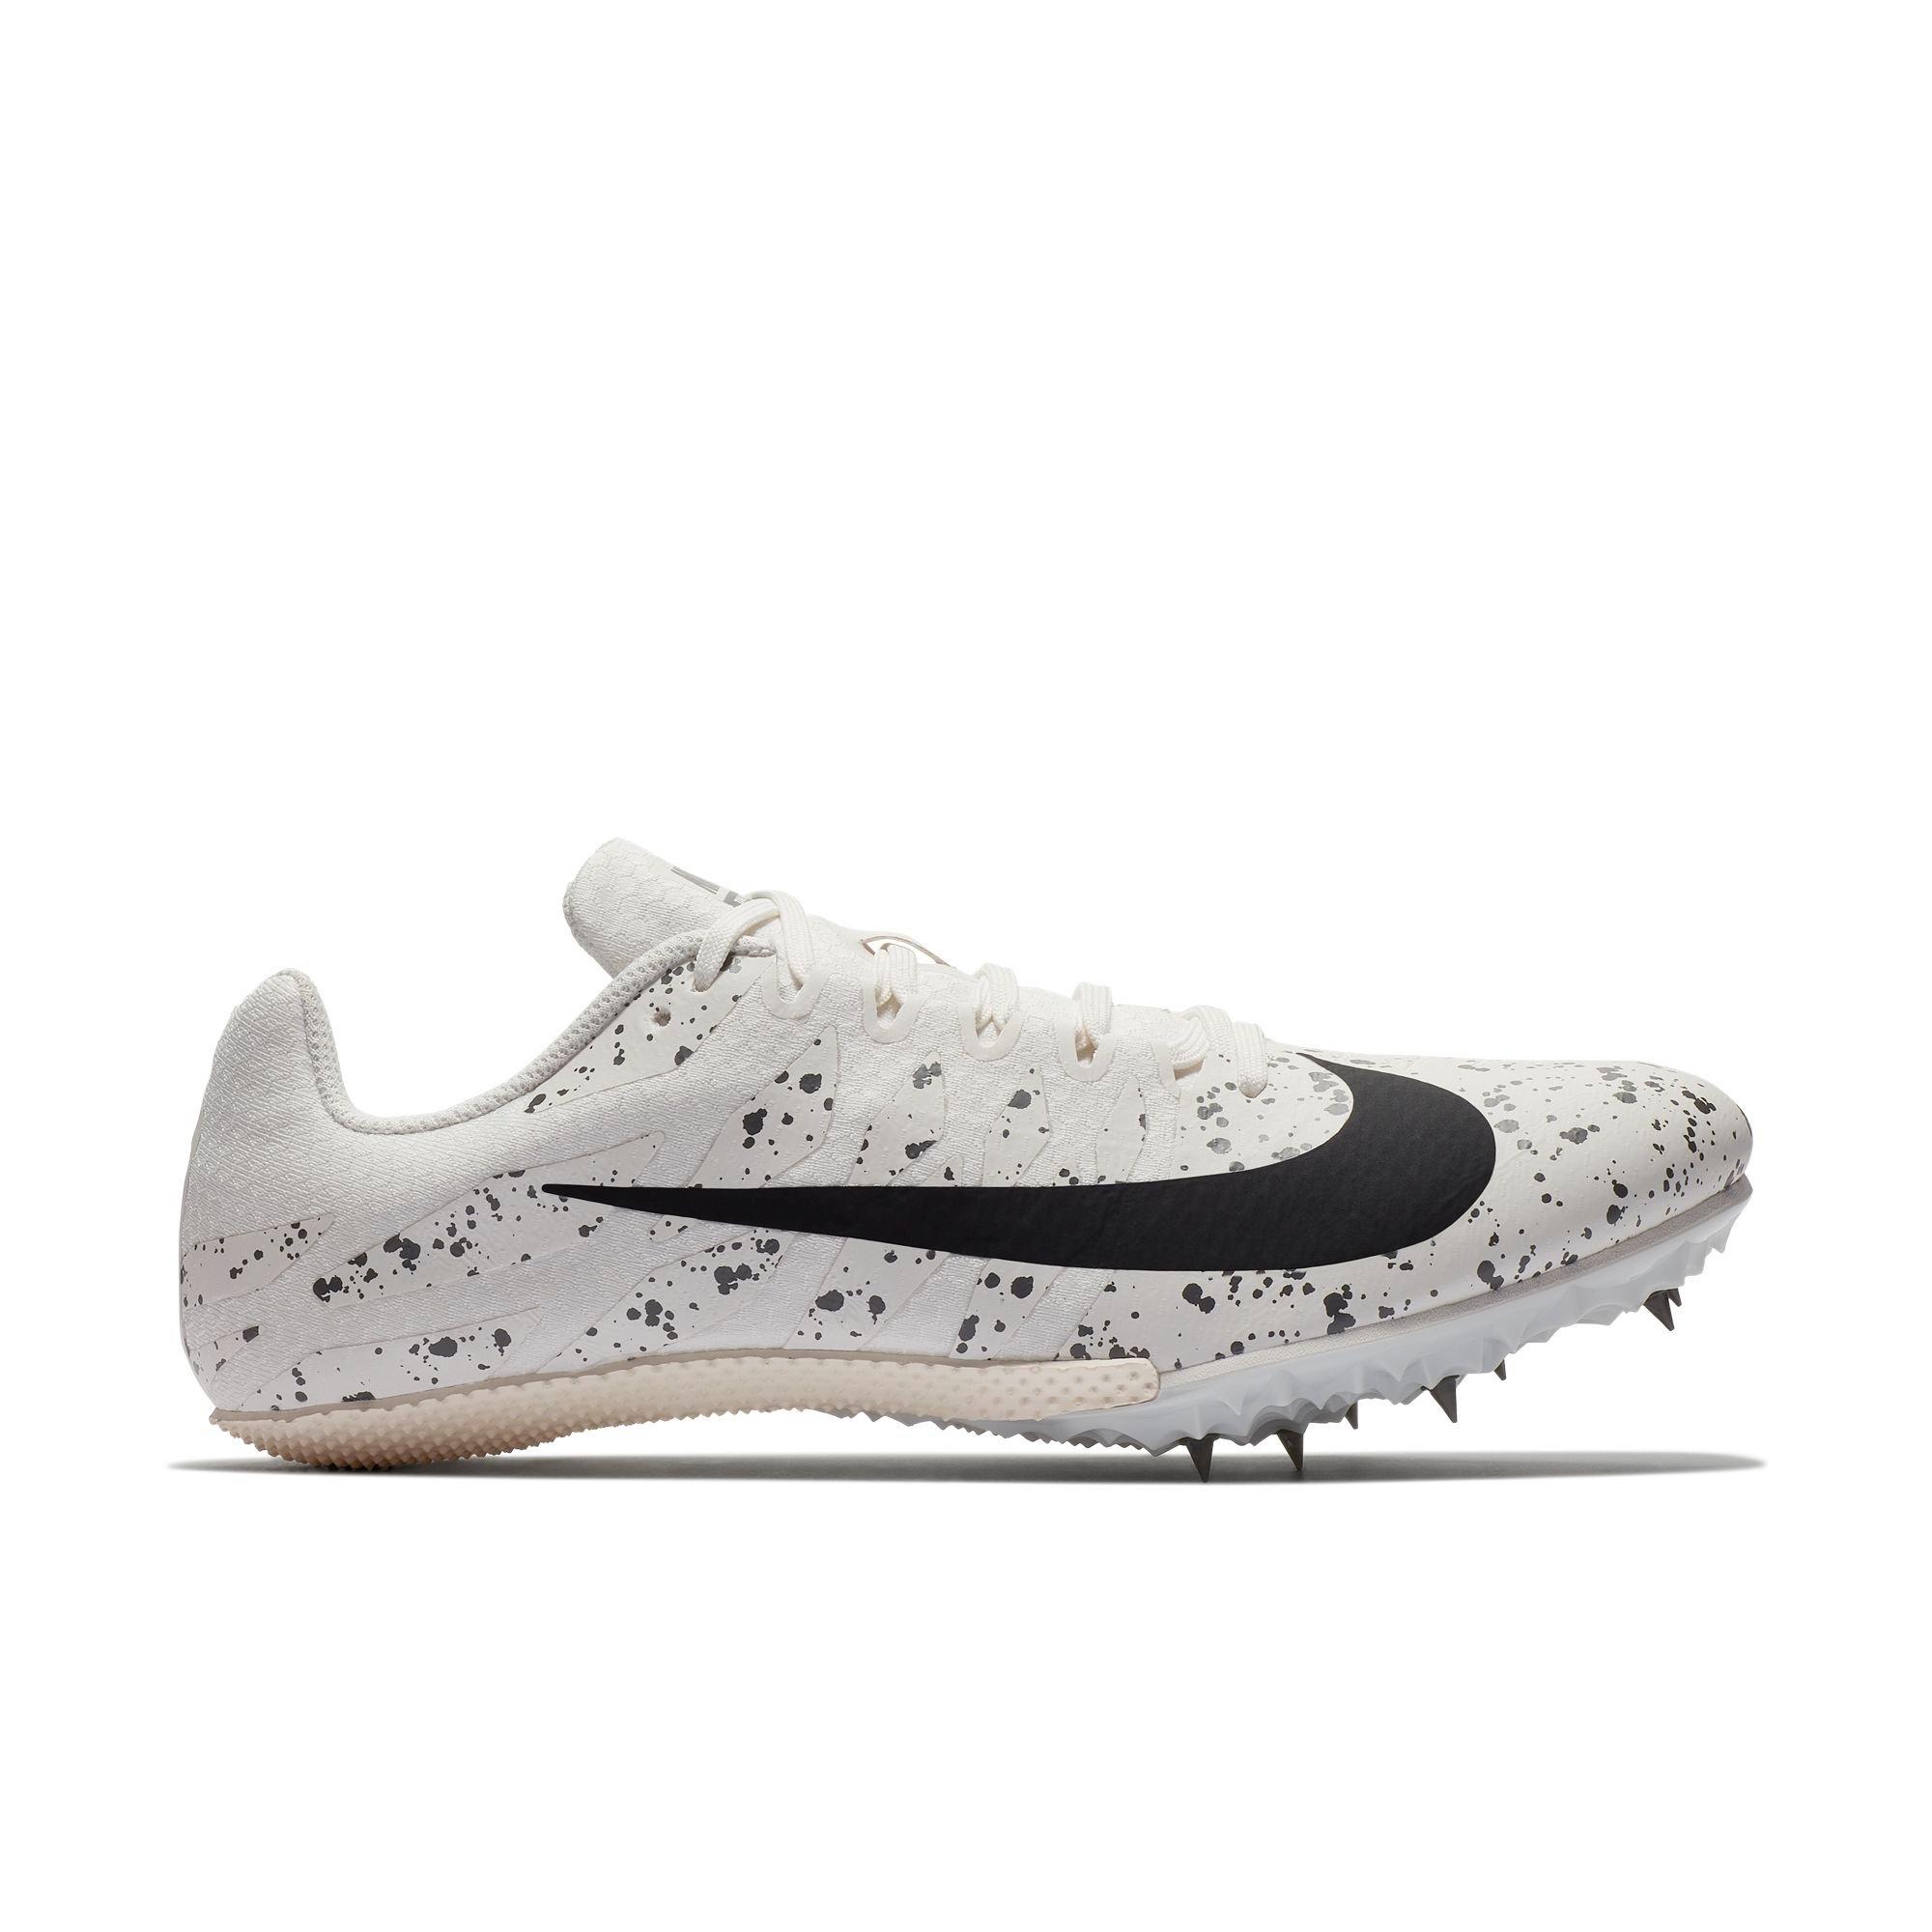 black and white nike track spikes